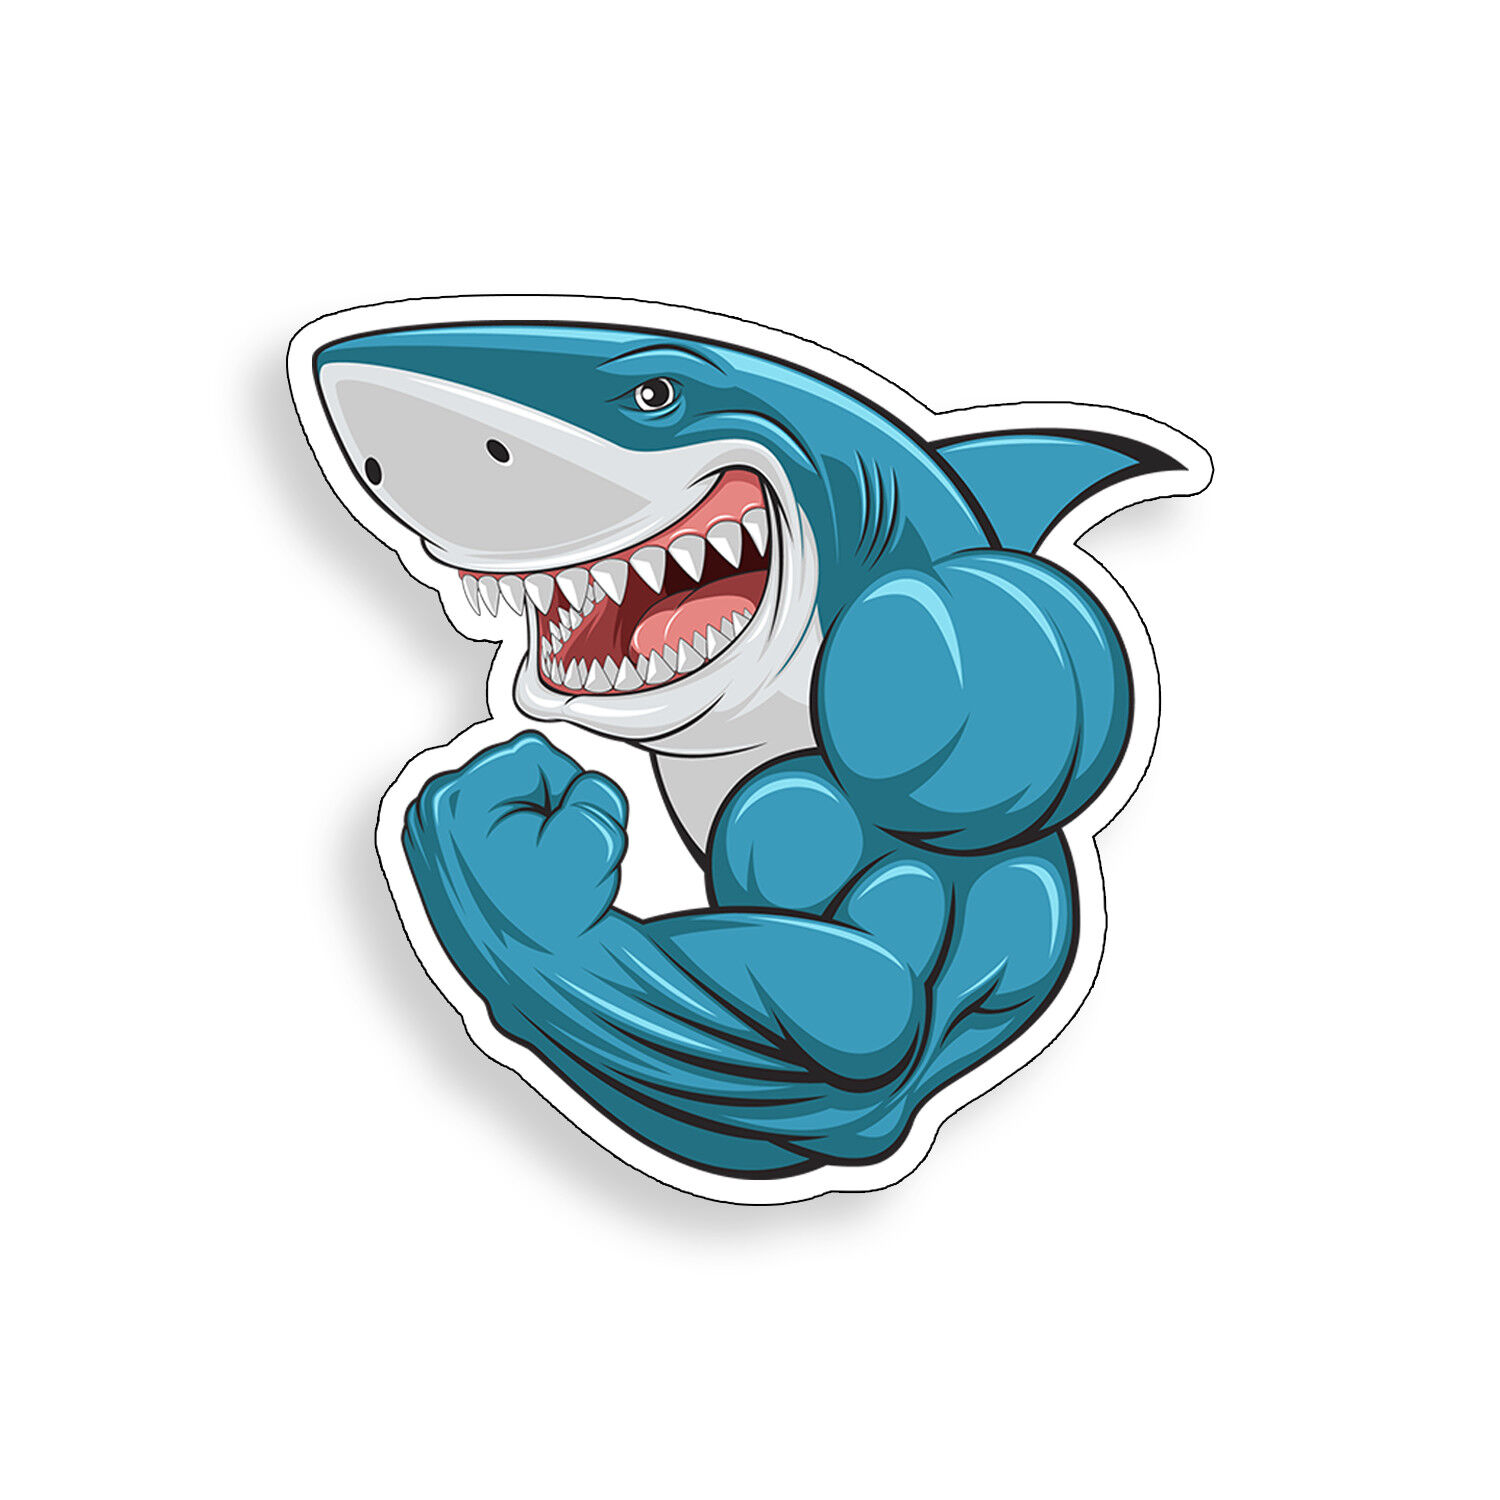 Muscle Shark Sticker Workout Gym Male Laptop Cup Car Vehicle Window Bumper Decal